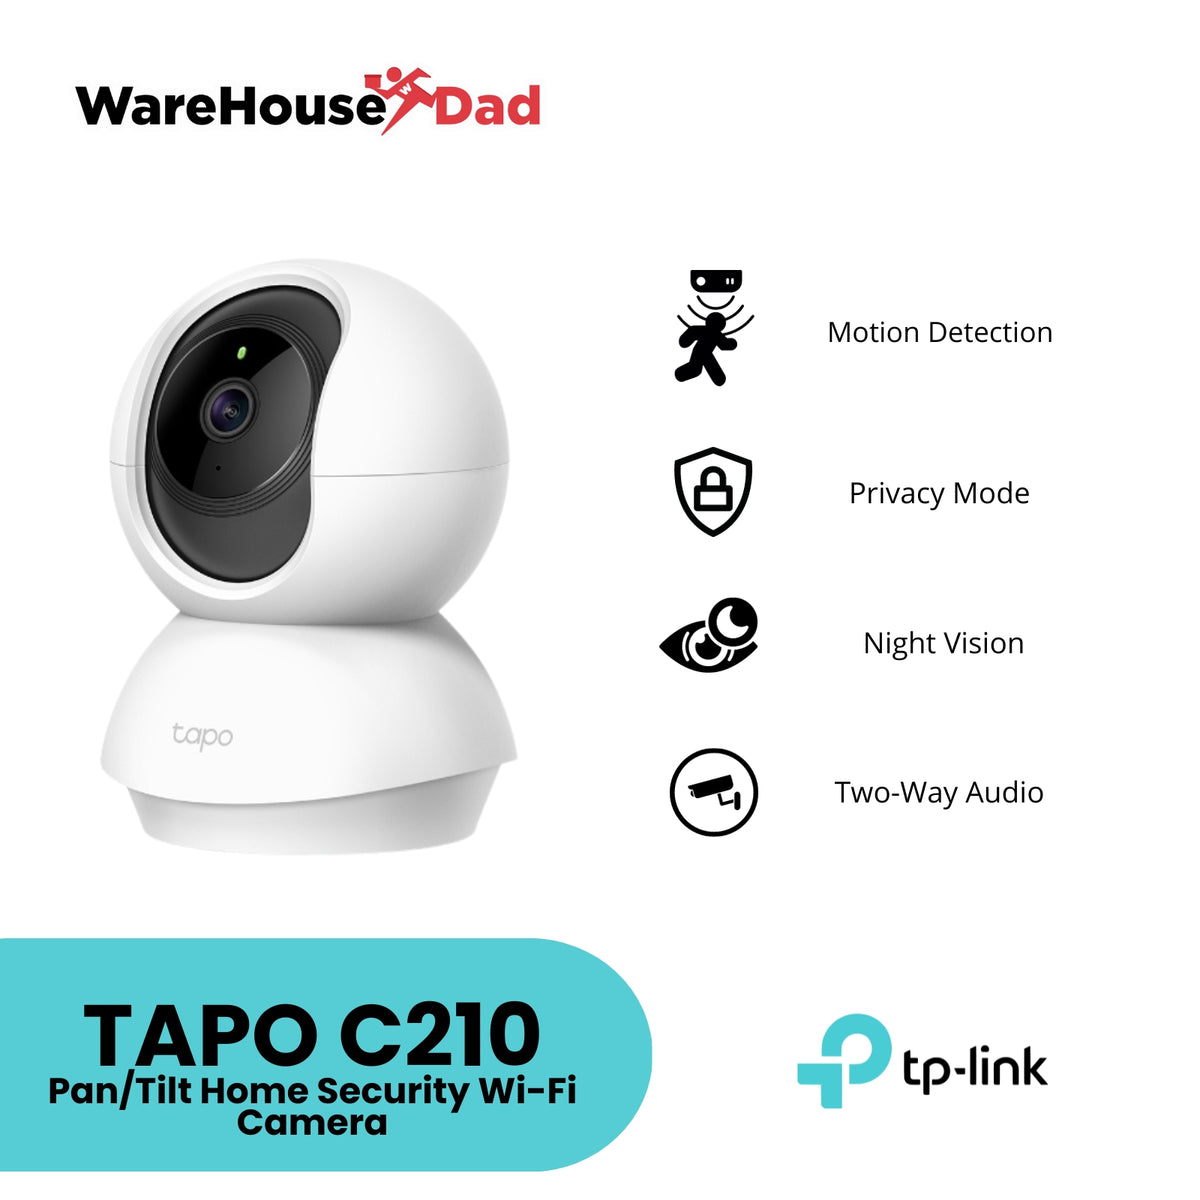 TP-Link - Pan/Tilt Home Security Wi-Fi Camera ~ Tapo C210 ✓ 3MP Ultra-High  Definition ✓ Two-Way Audio ✓ Sound and Light Alarm ✓ Night Vision up to 30  ft ✓ Motion Detection